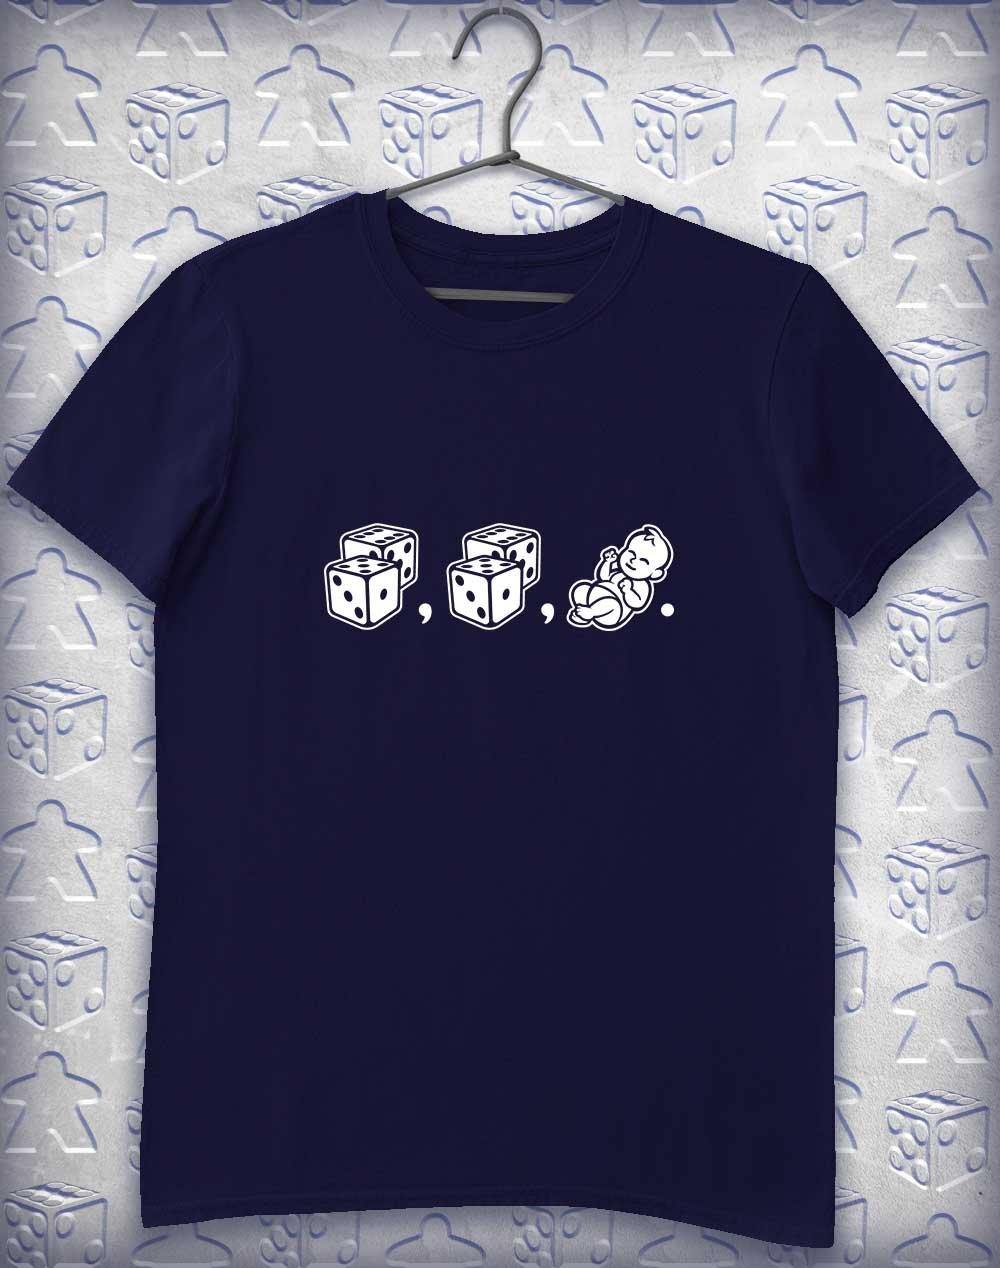 Dice Dice Baby (Plural) Alphagamer T-Shirt L / Navy  - Off World Tees